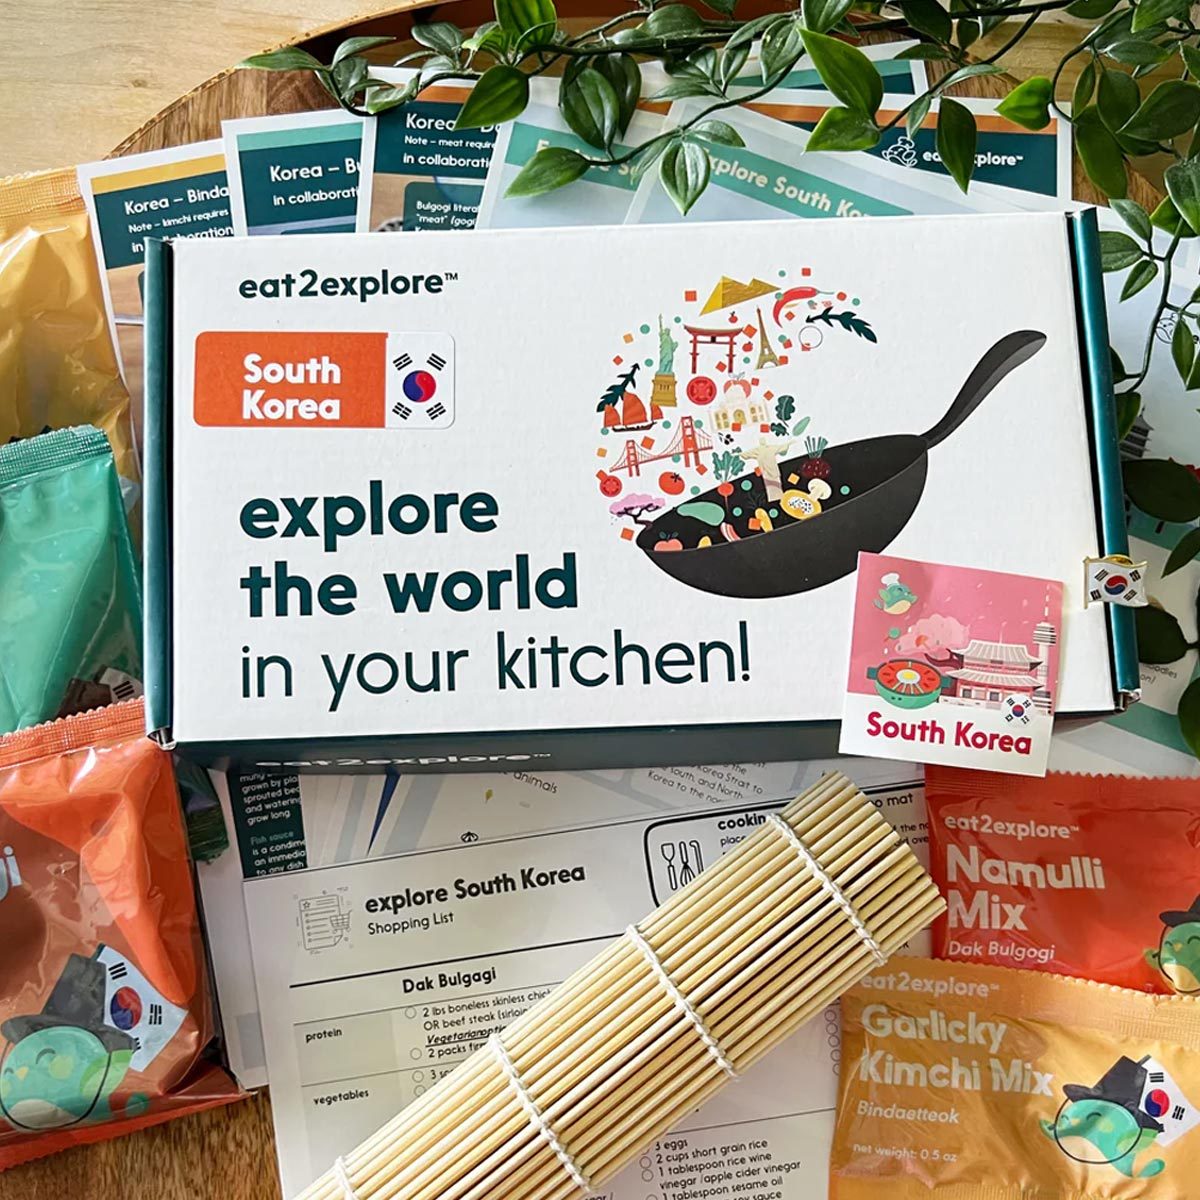 10 Best Cooking + Baking Subscription Box Gifts for Foodies